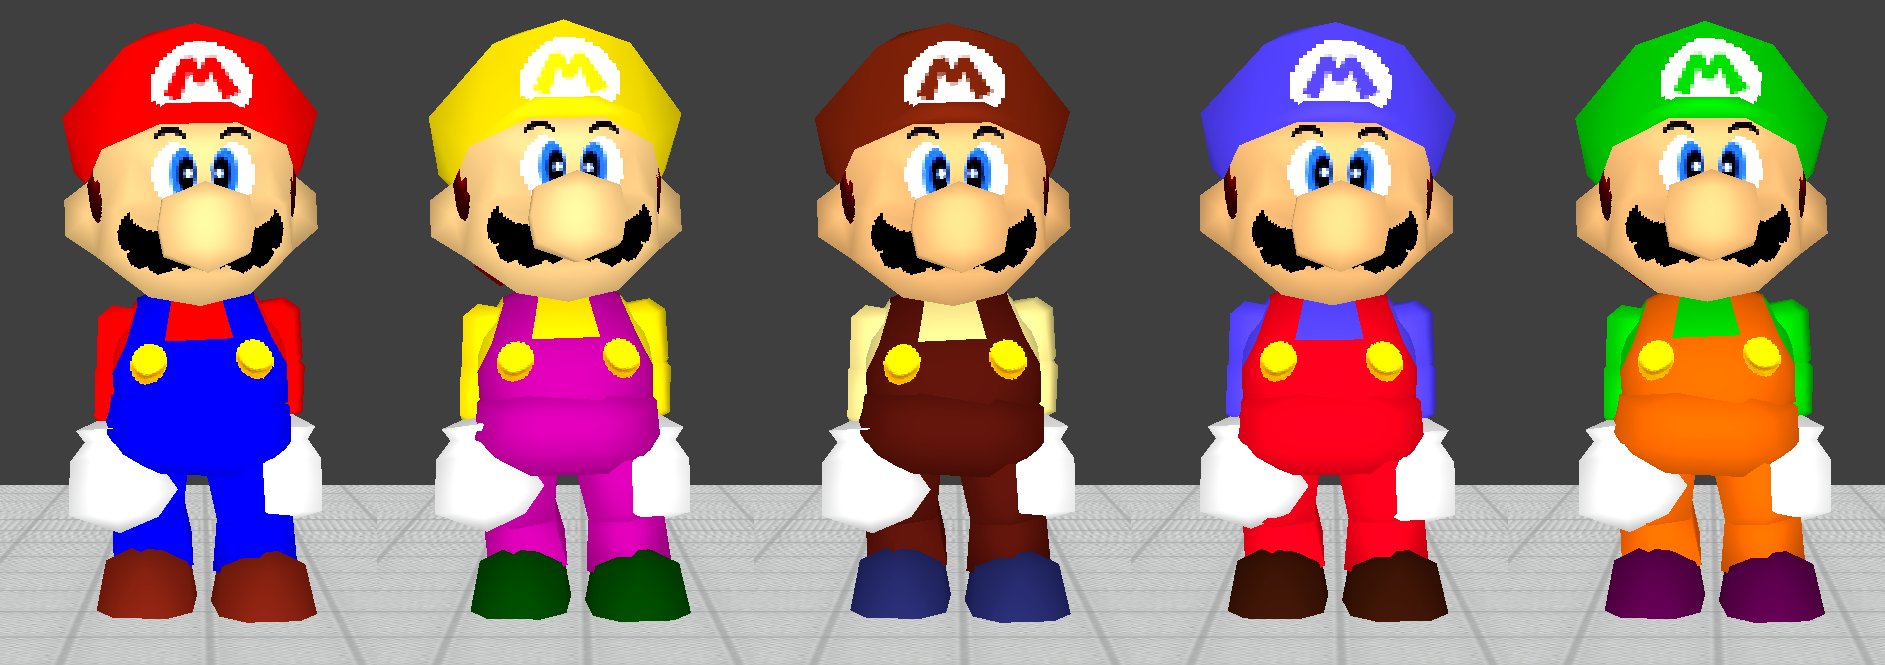 Mario is now in 'Garry's Mod' with his entire 'Super Mario 64' move set